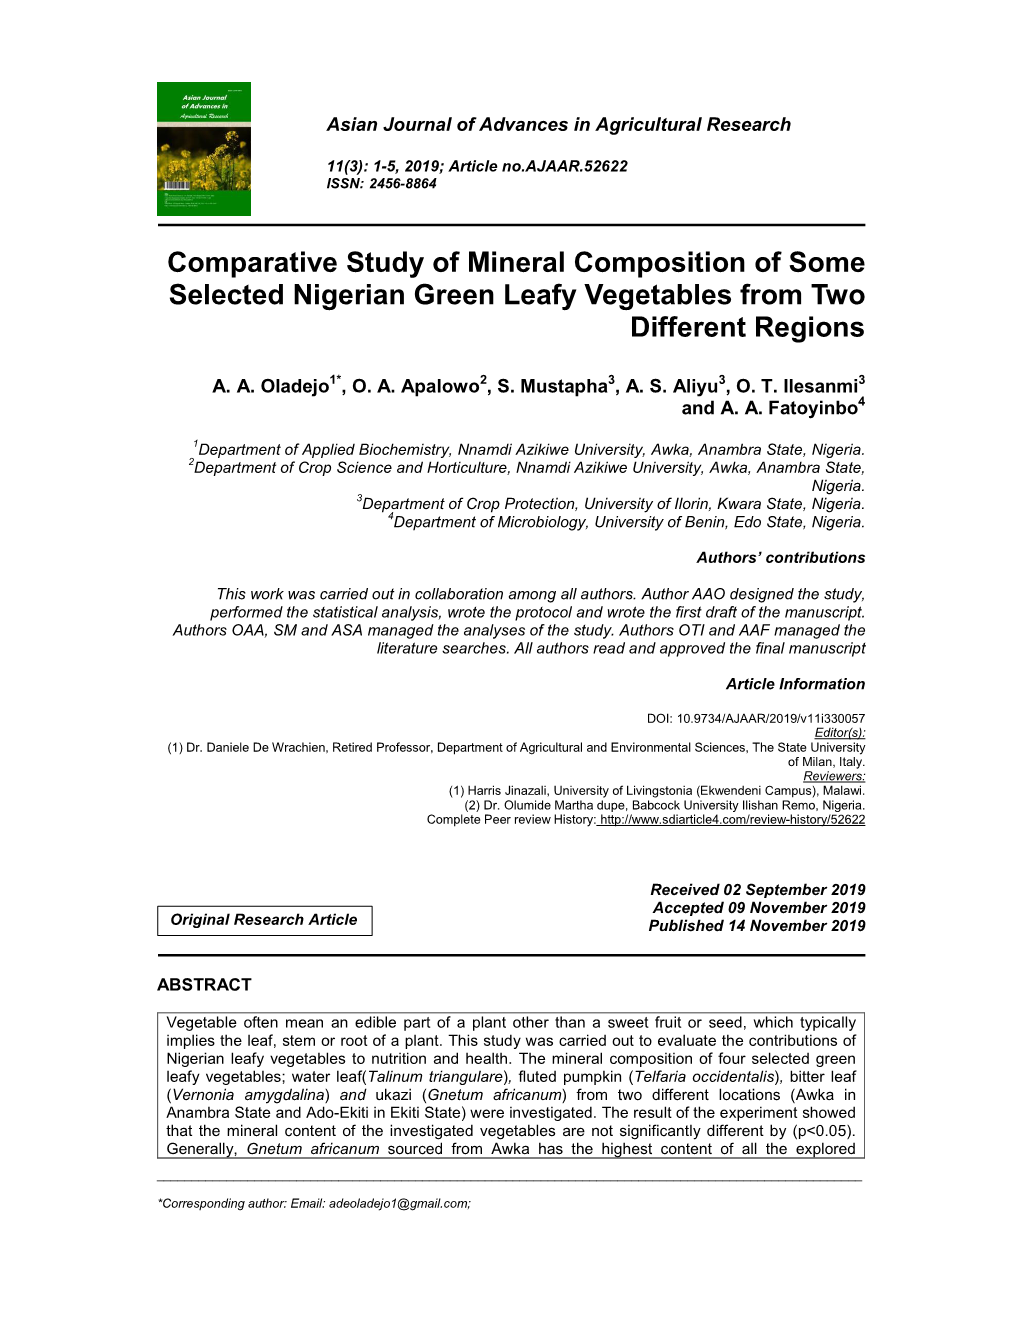 Comparative Study of Mineral Composition of Some Selected Nigerian Green Leafy Vegetables from Two Different Regions